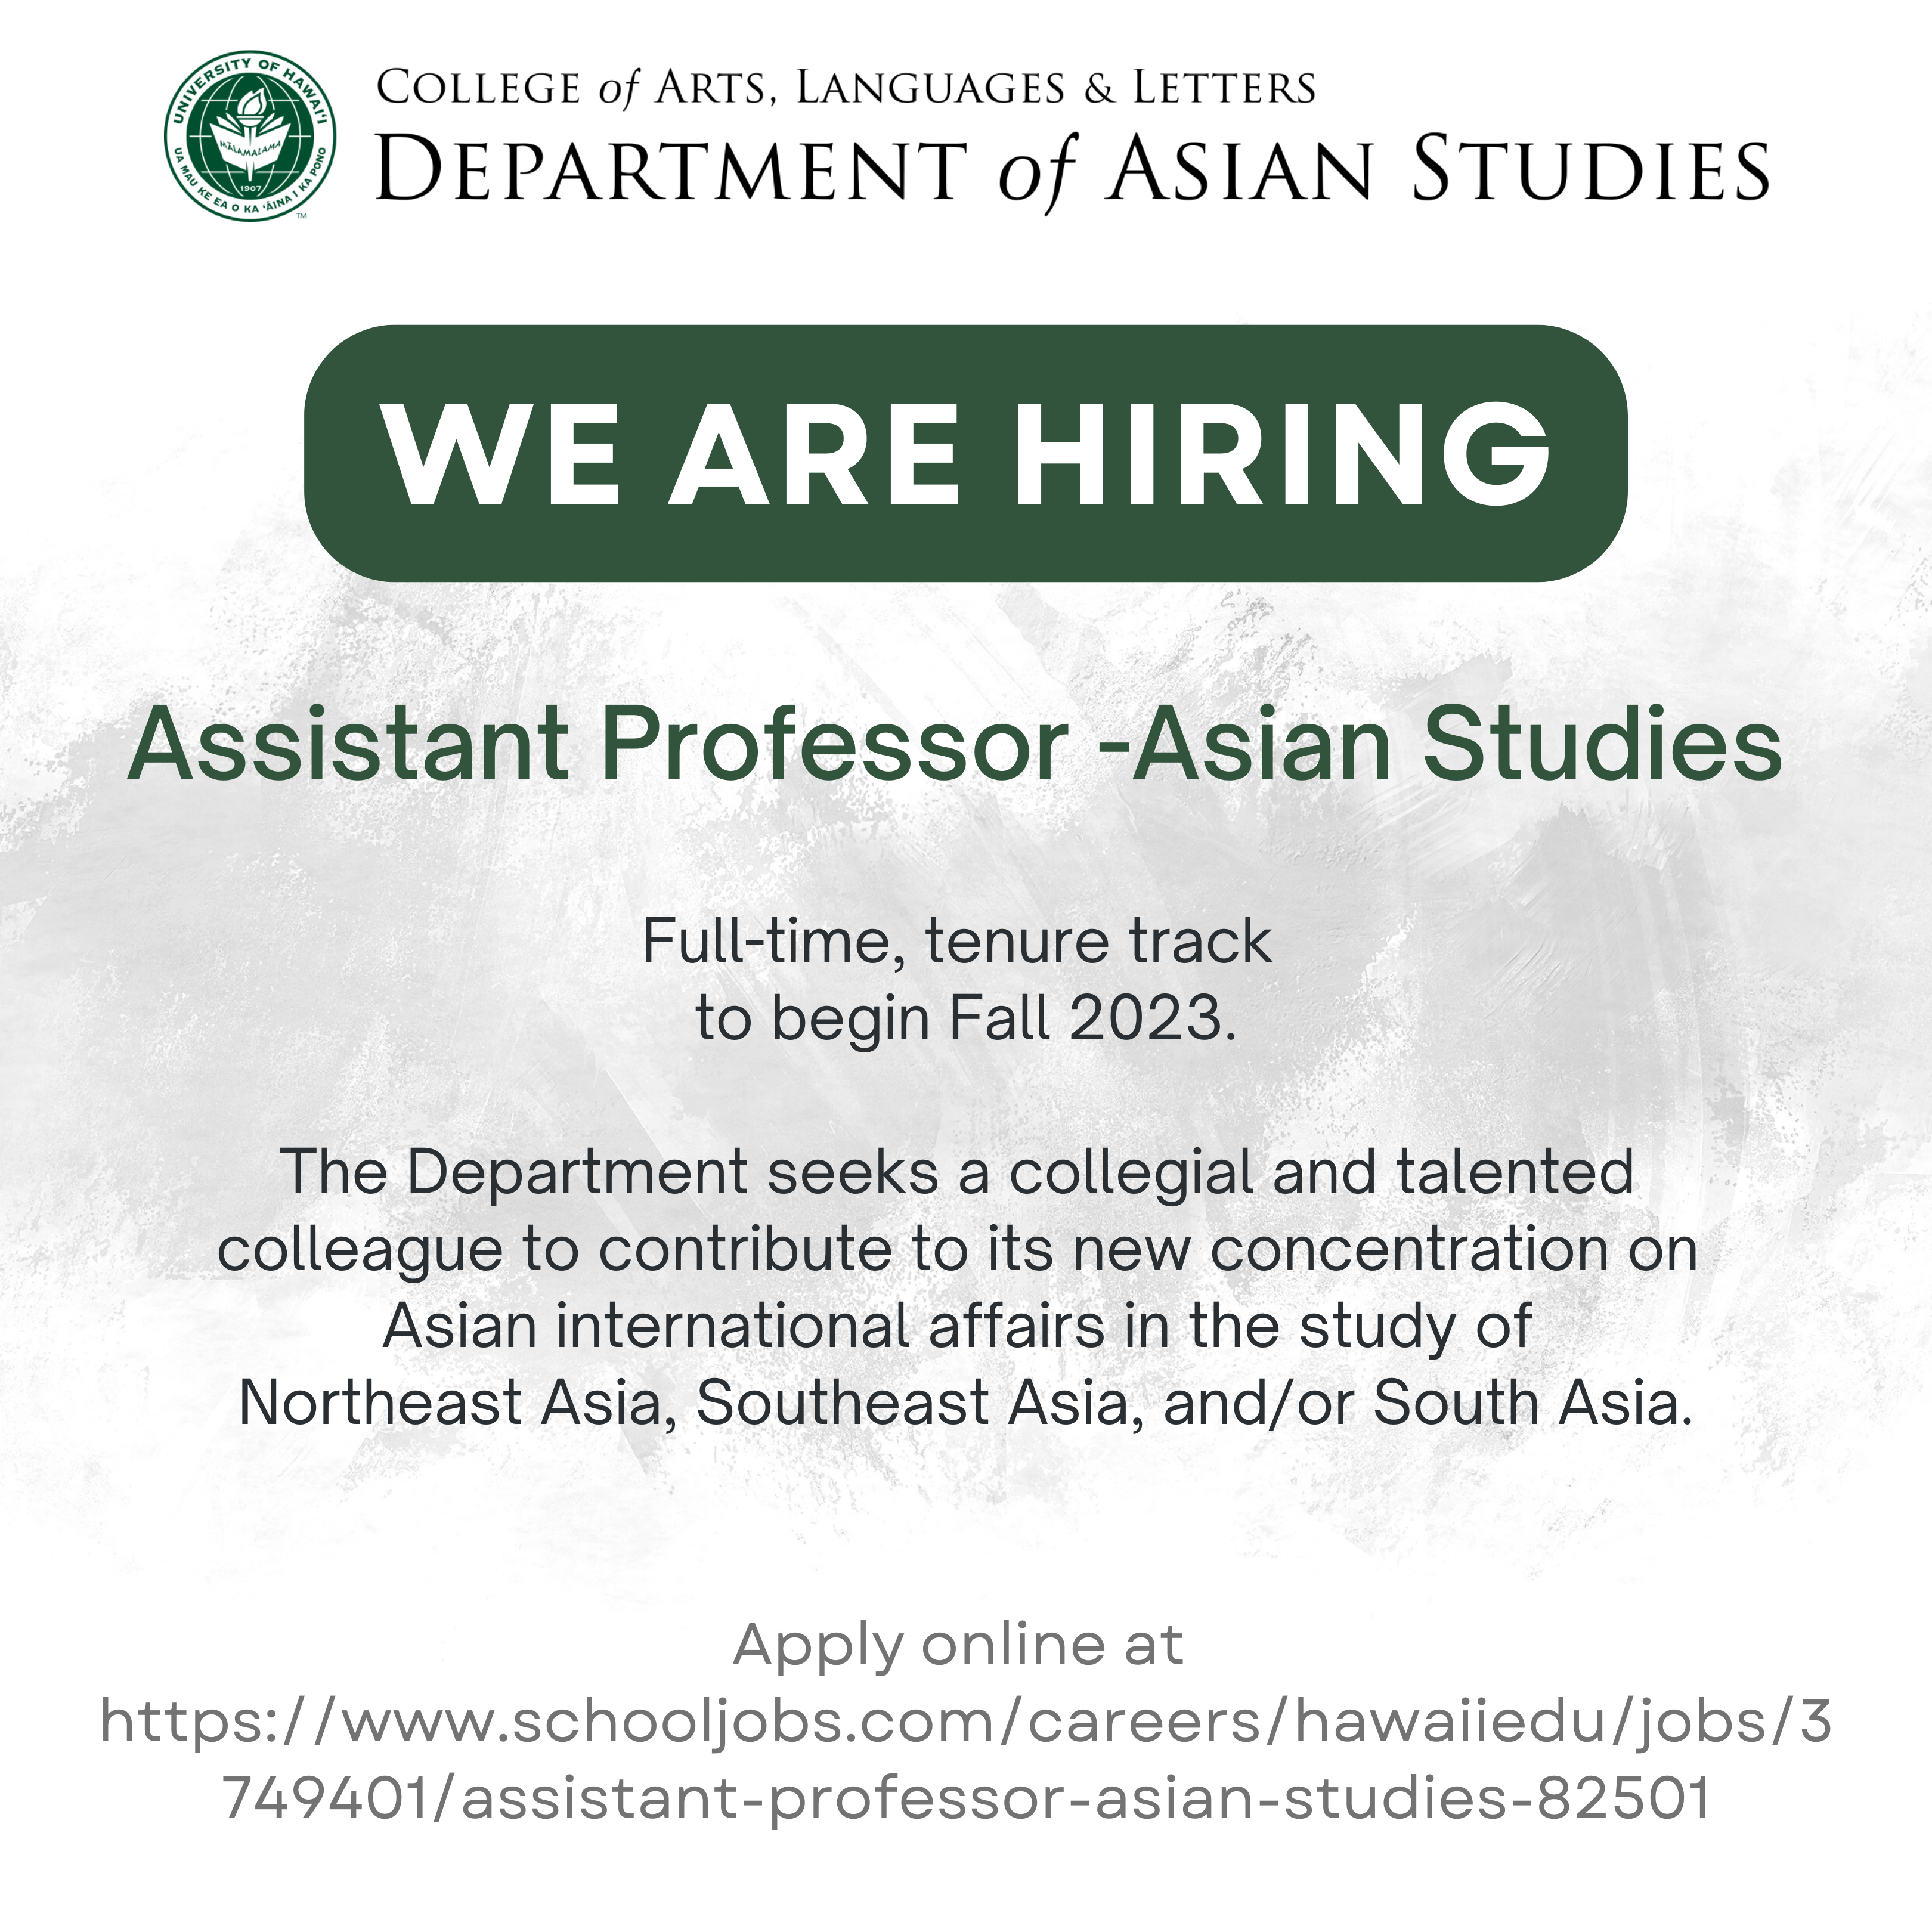 Notice that the Department of Asian Studies is hiring an Assistant Professor of Asian Studies